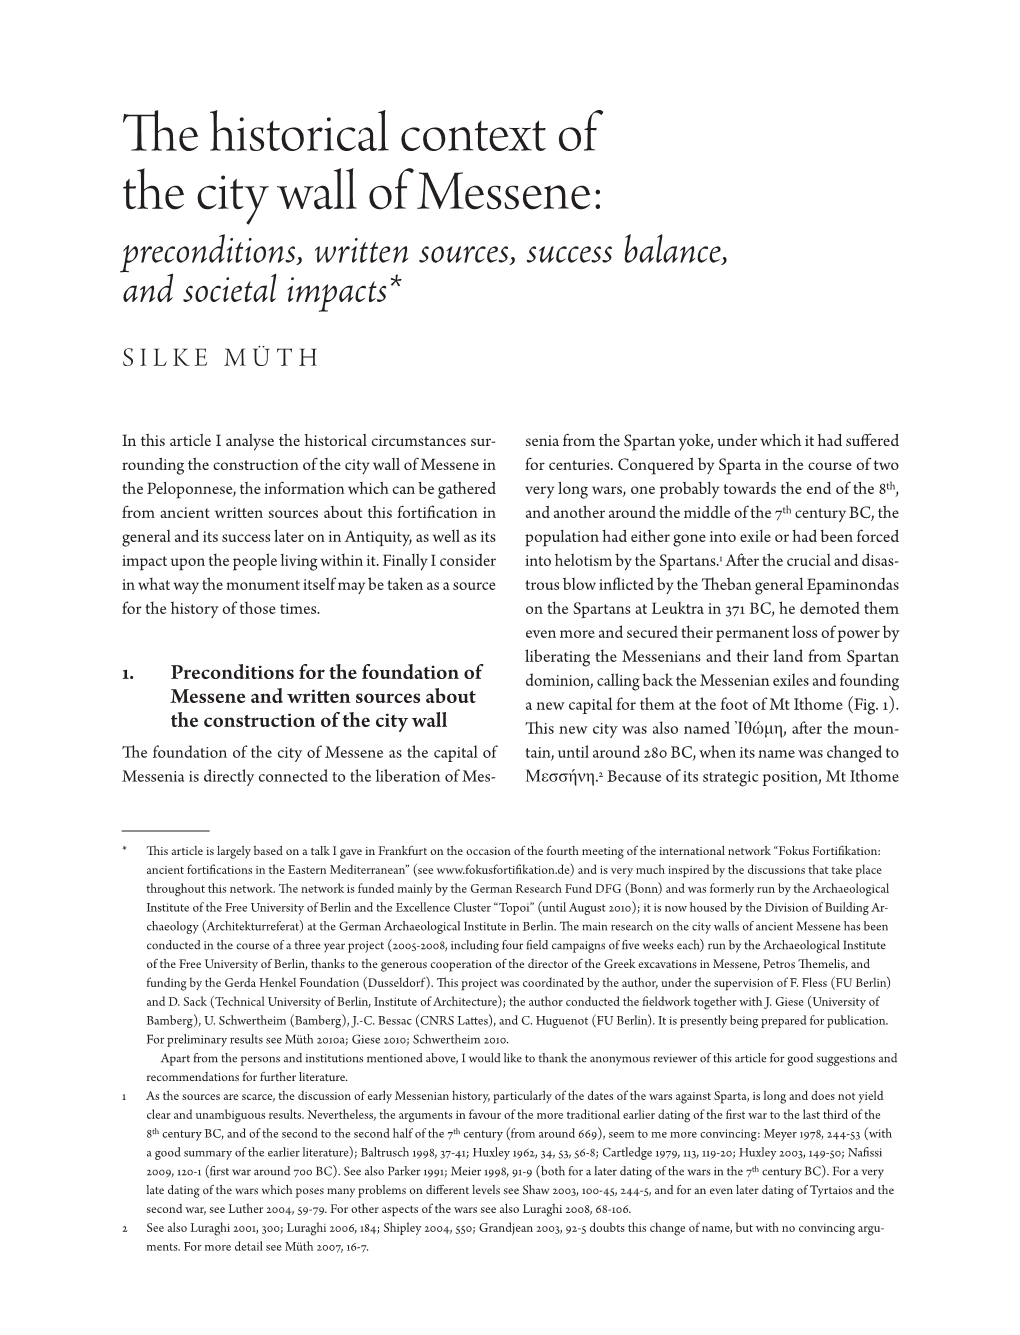 The Historical Context of the City Wall of Messene: Preconditions, Written Sources, Success Balance, and Societal Impacts*